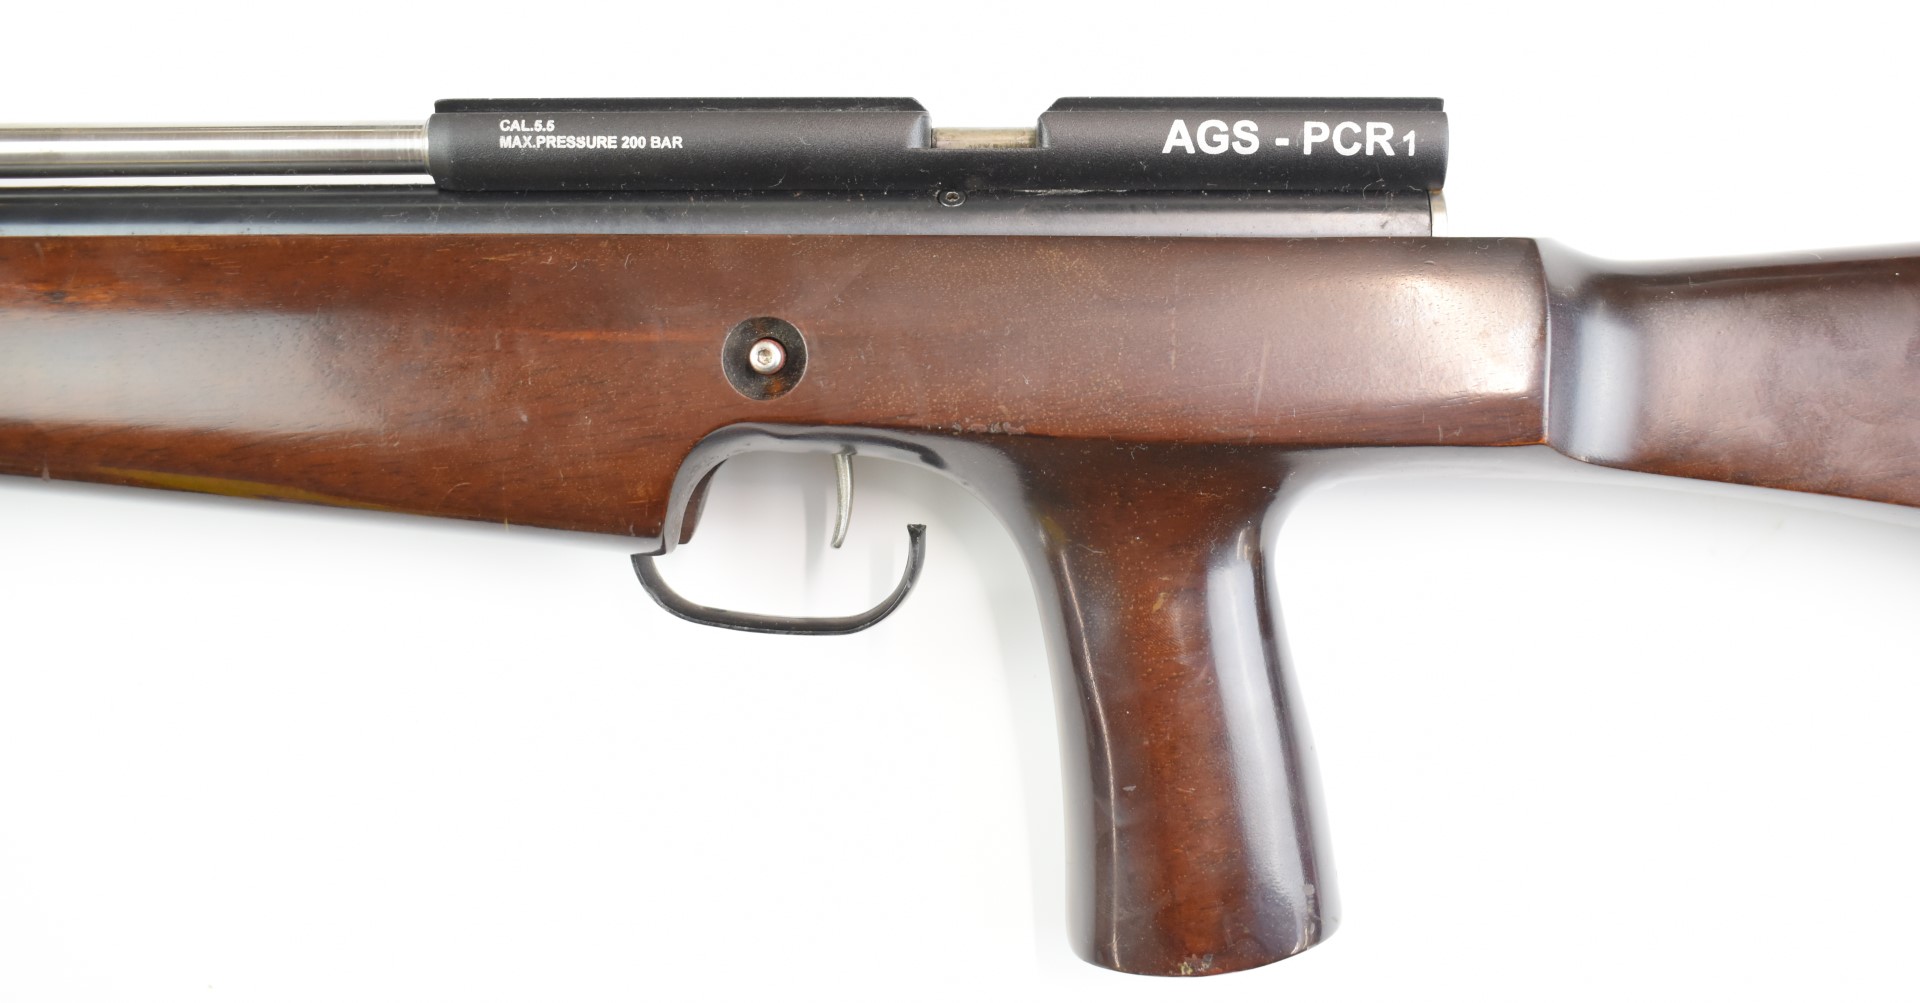 AGS-PCR1 .22 PCP bolt-action air rifle with pistol grip and adjustable trigger, serial number 00911. - Image 8 of 9